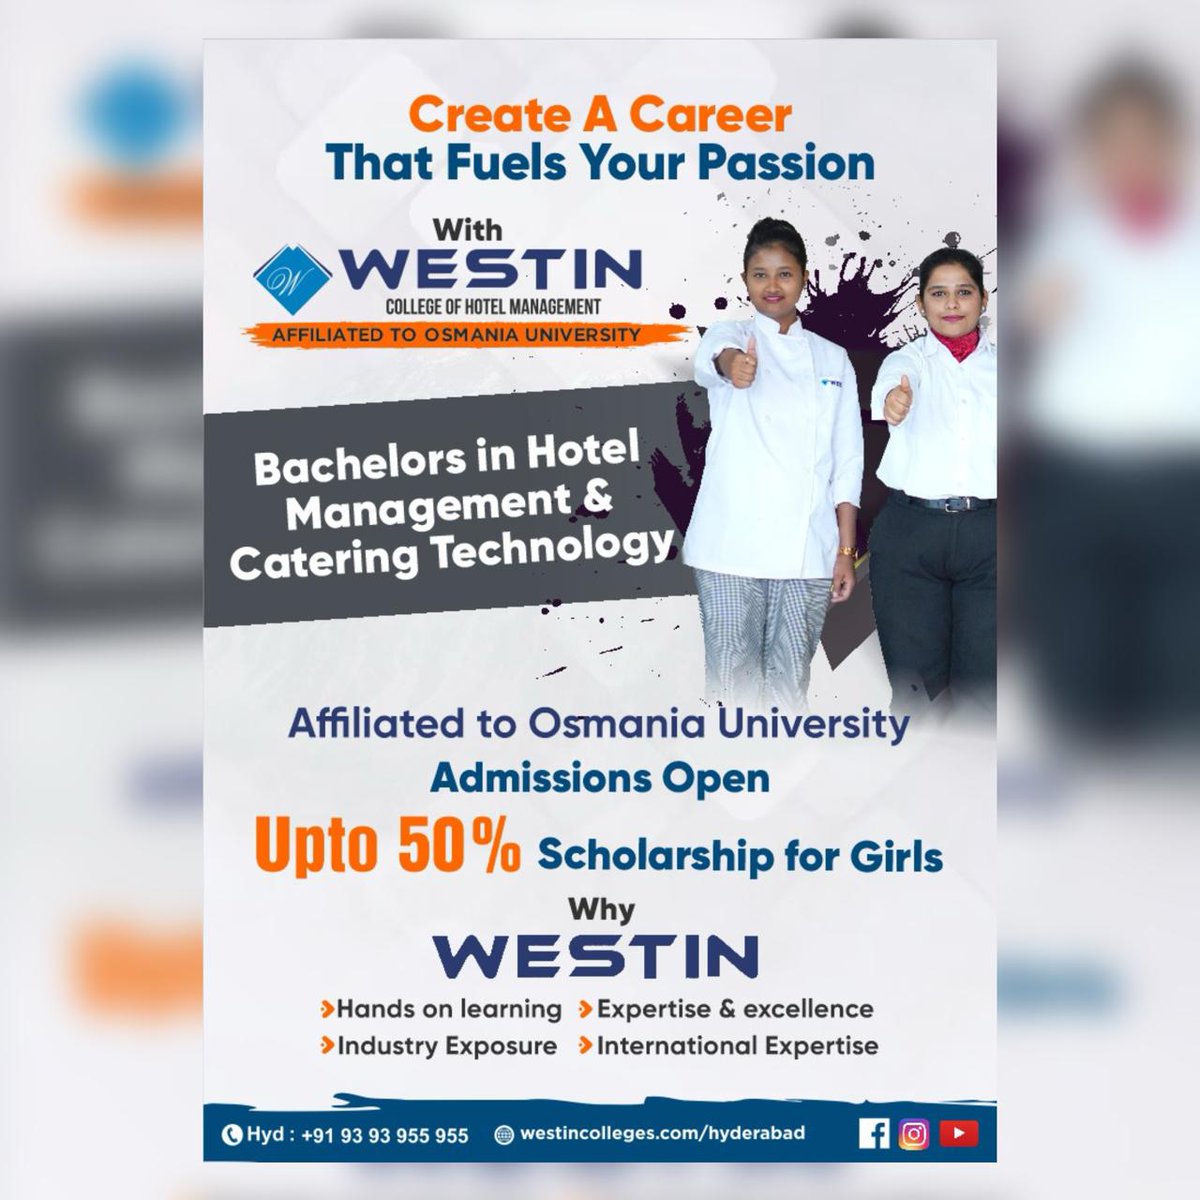 Enroll at Westin College of Hotel Management! Unlock your future in the hospitality industry with upto a 50% scholarship exclusively for girls. 👩‍🎓 Start your journey towards success today.#WestinCollege #HotelManagement  #Hotelmanagementcollege #admissionsopen #Admissions #Degree